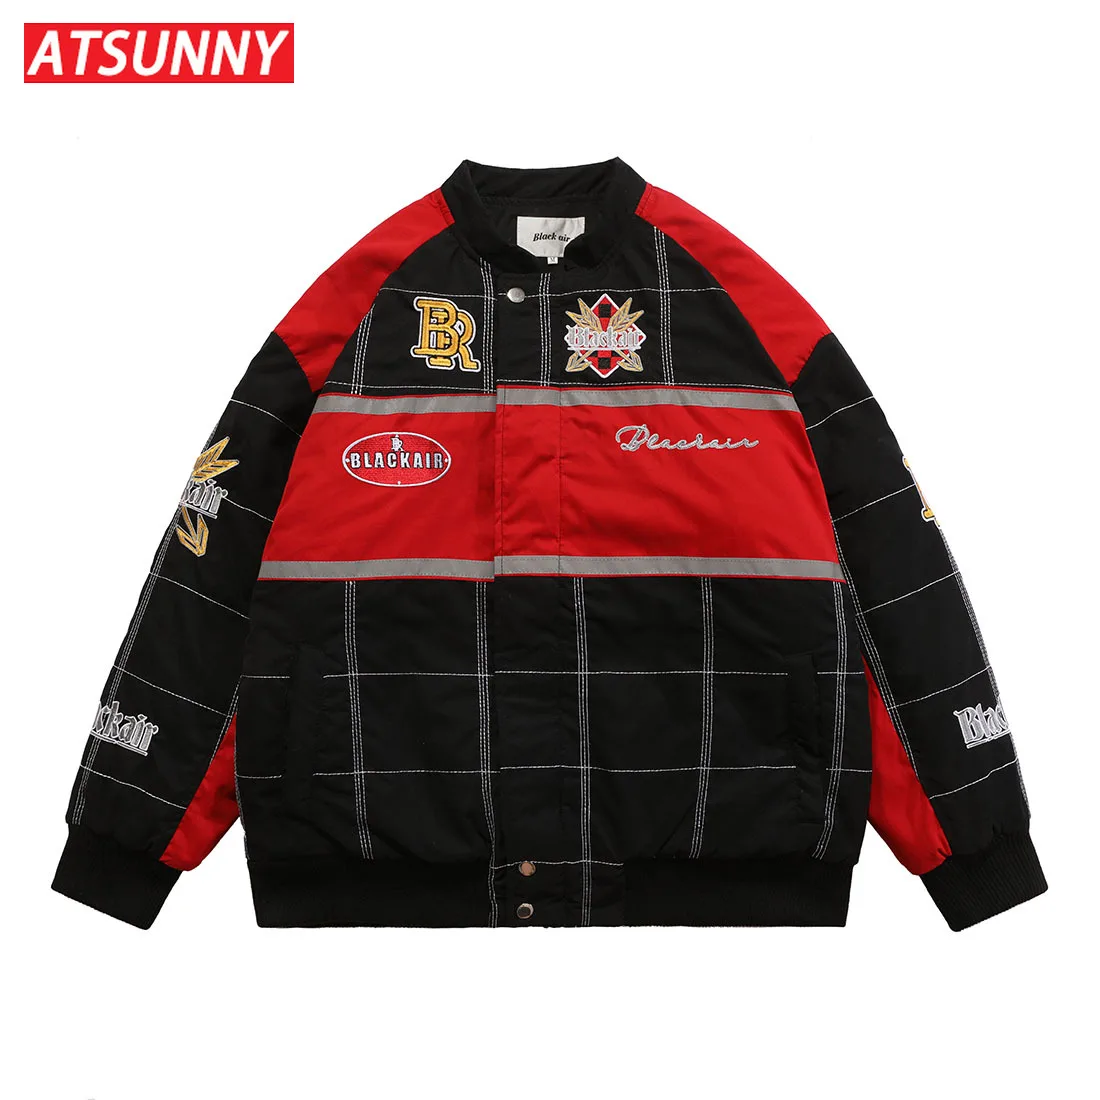 

ATSUNNY Hip Hop American Jackets for Mens Harajuku Casual Oversize Jackt Streetwear Autumn and Winter Fashion Clothing Trends